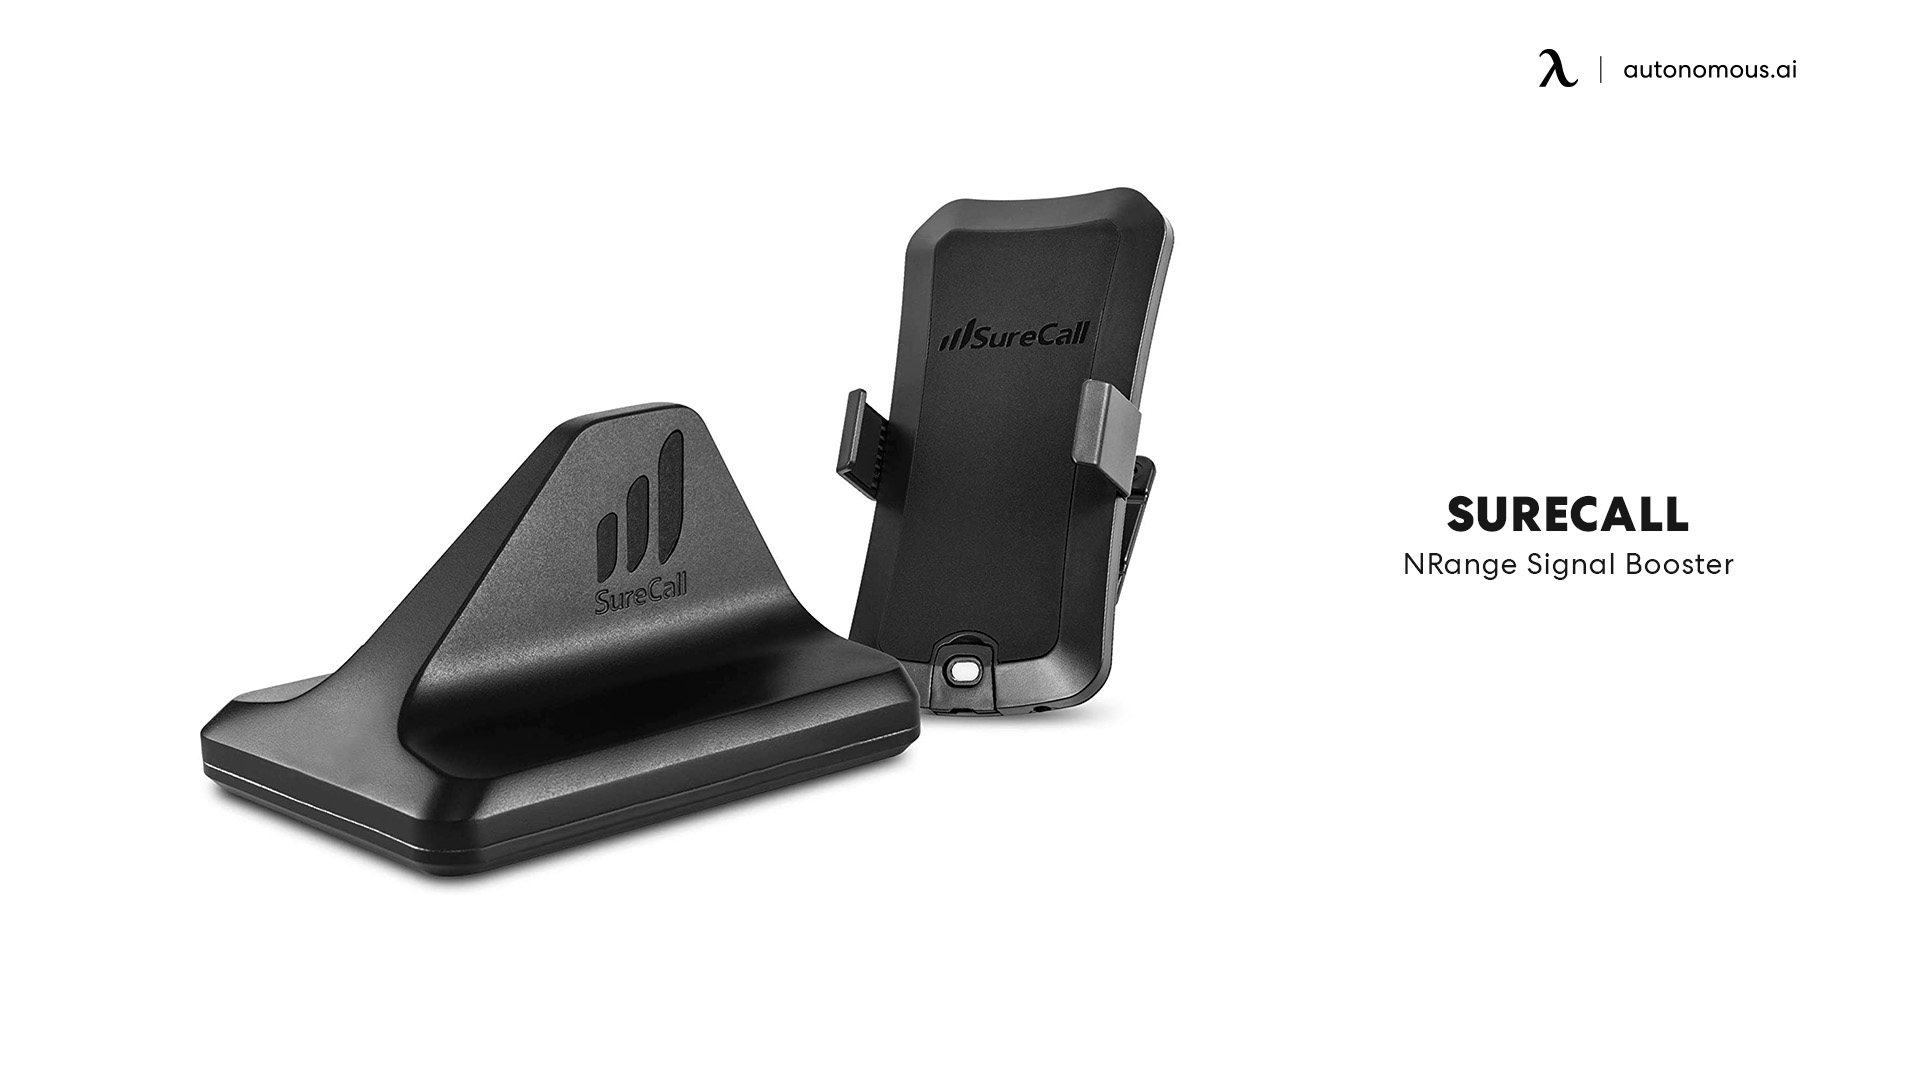 SureCall NRange portable cell phone signal booster